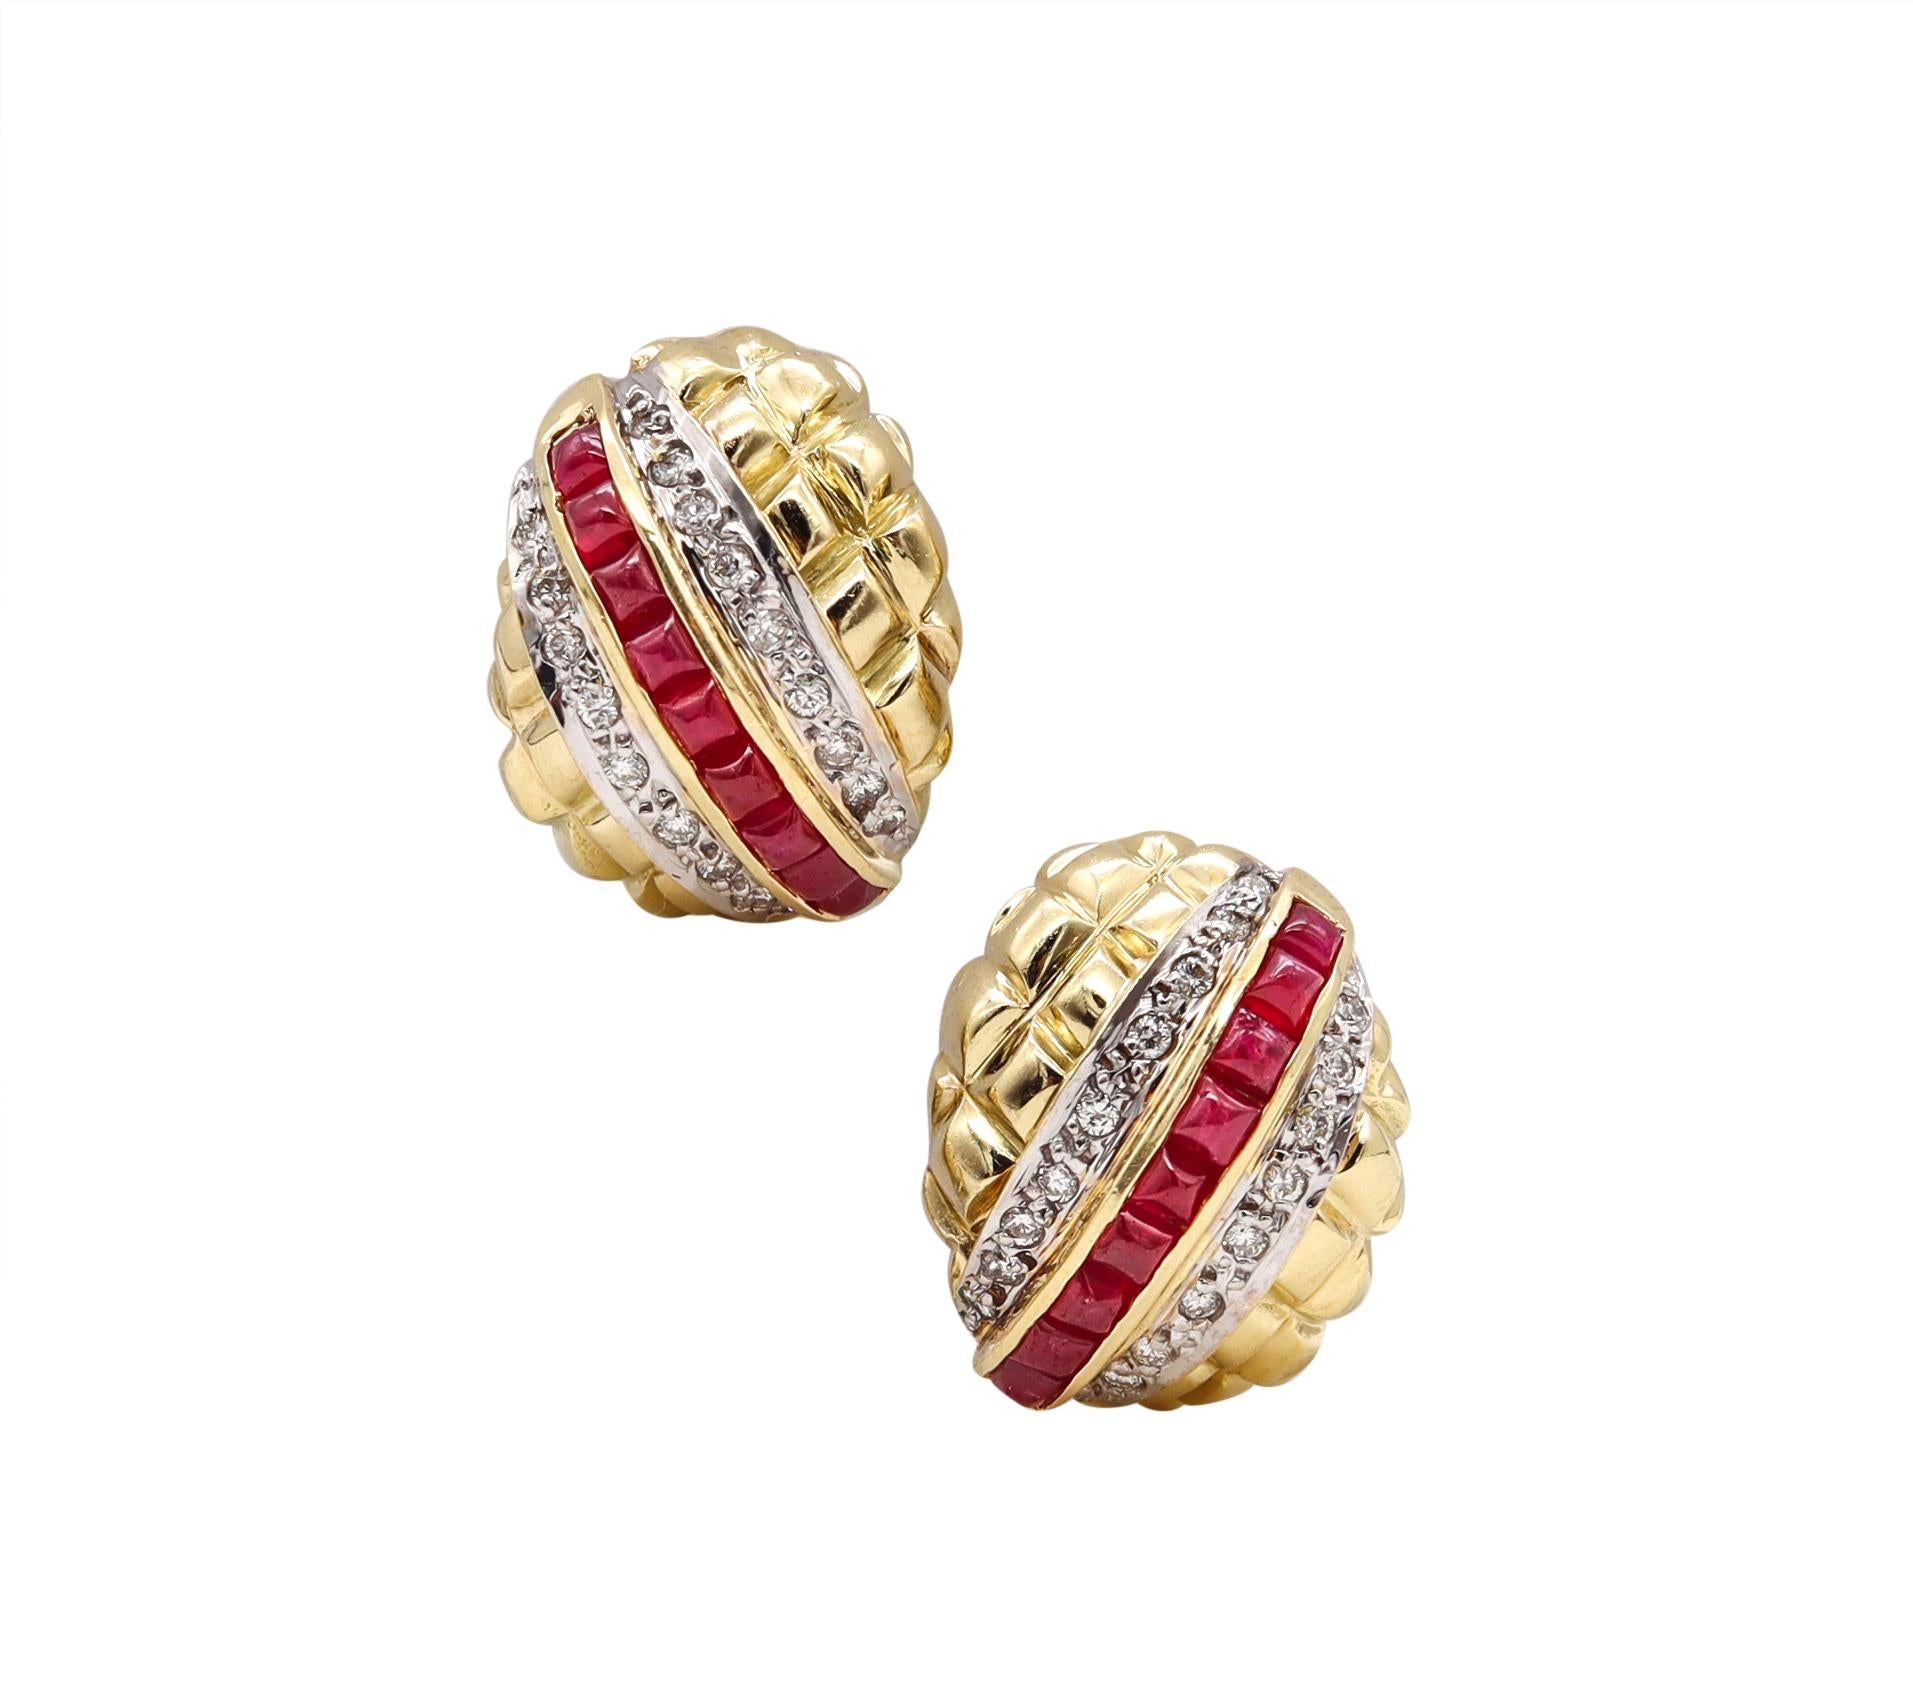 Mixed Cut Modern 1970 Gem Set Clips Earrings in 18kt Yellow Gold 3.42 Cts Rubies Diamonds For Sale